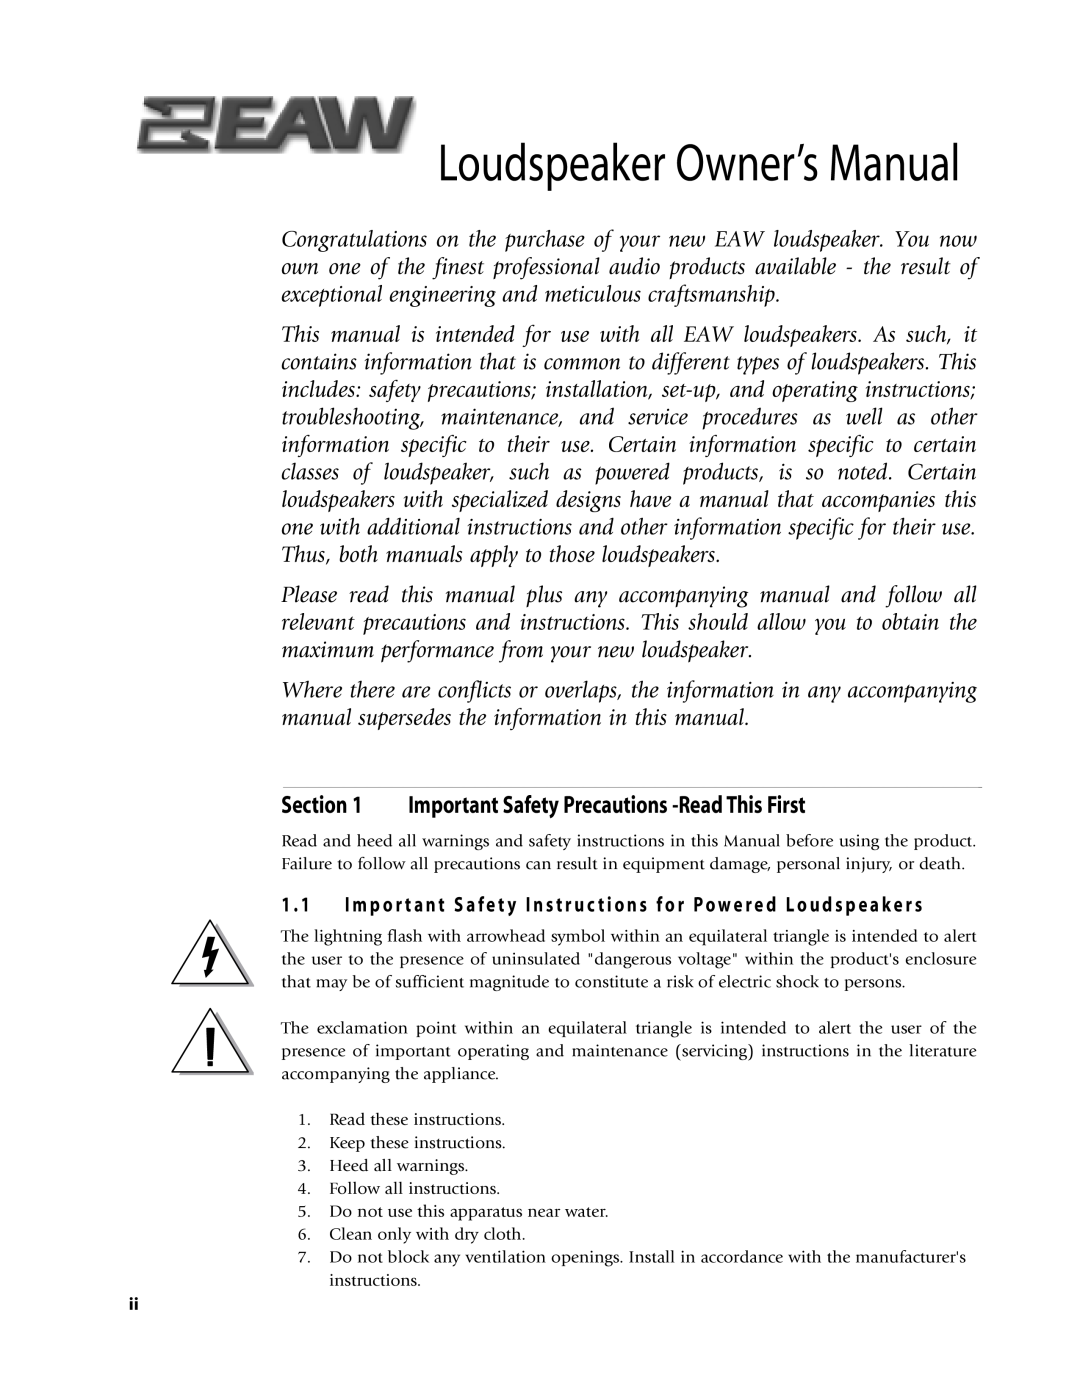 EAW Loudspeaker's owner manual Important Safety Precautions -Read This First, Loudspeaker Owner’s Manual 